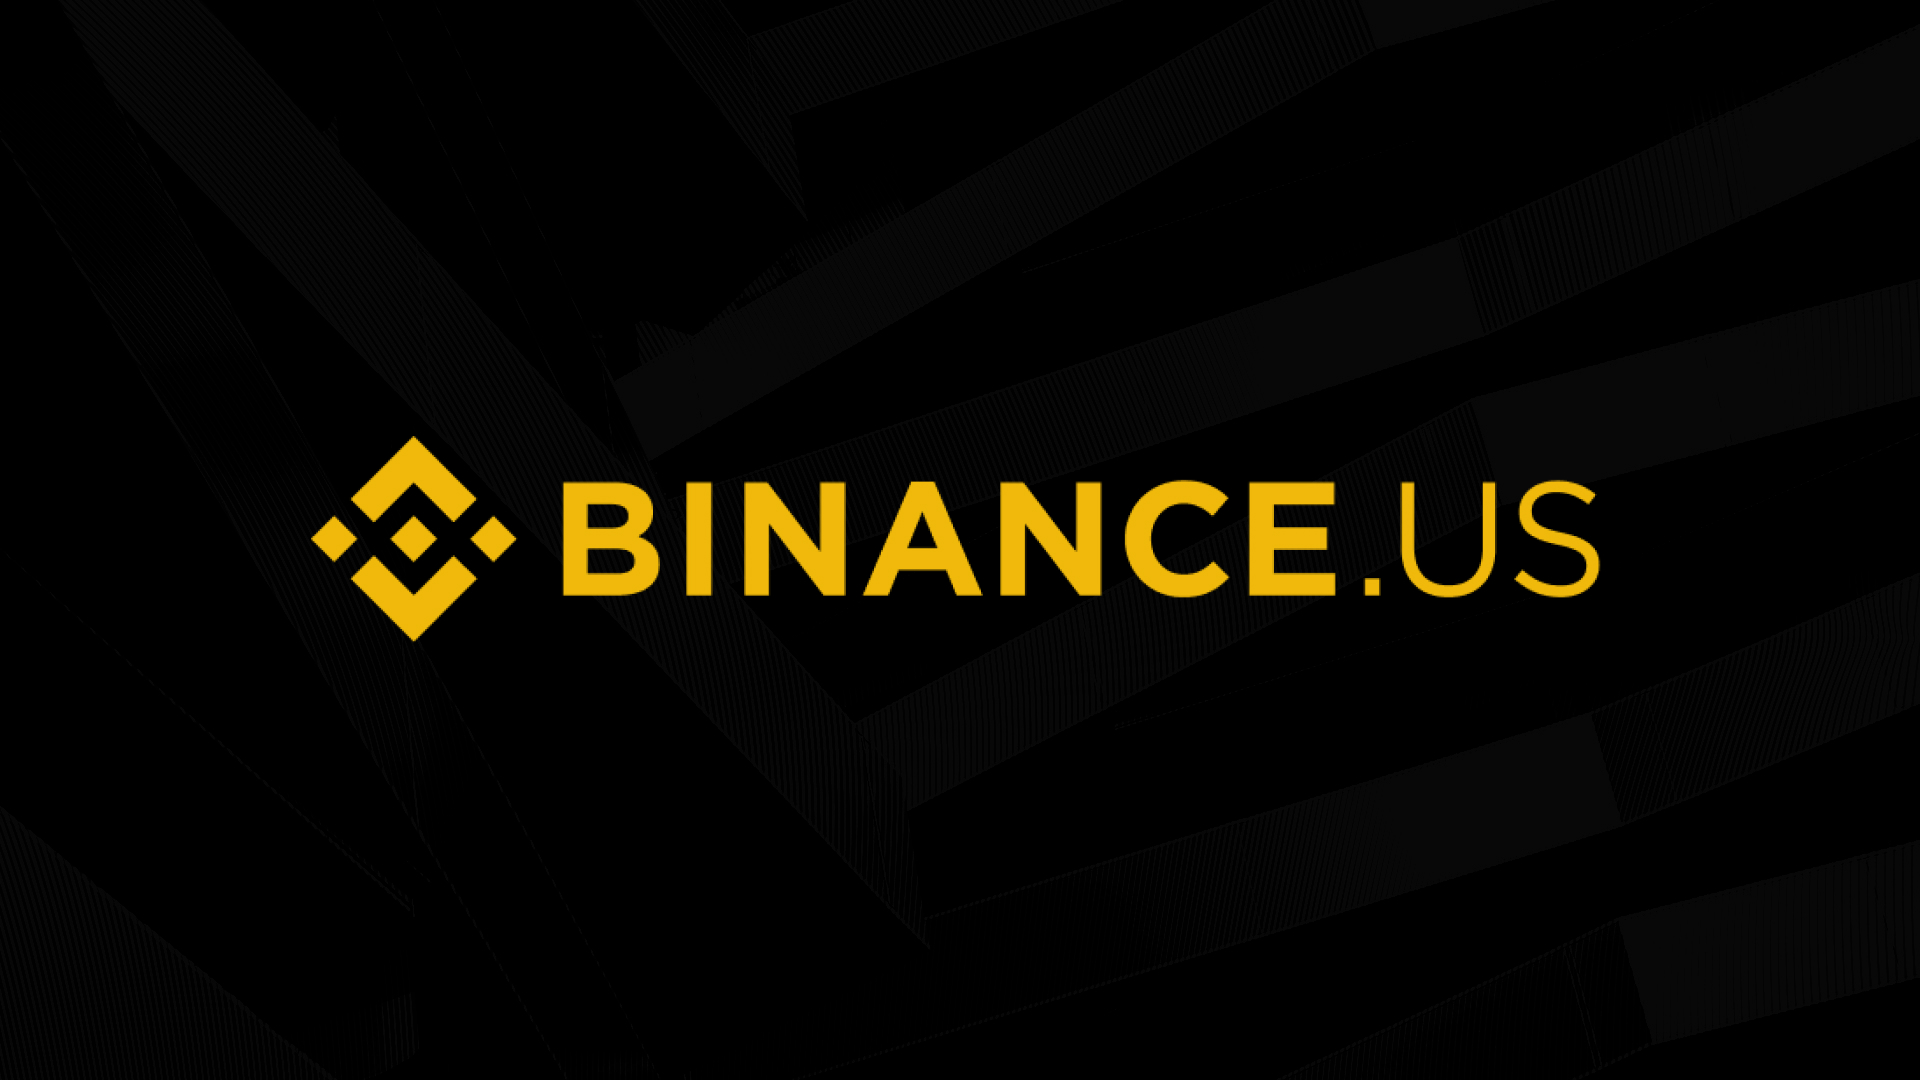 SEC Files Motion to Freeze Assets of Two Binance.US Units